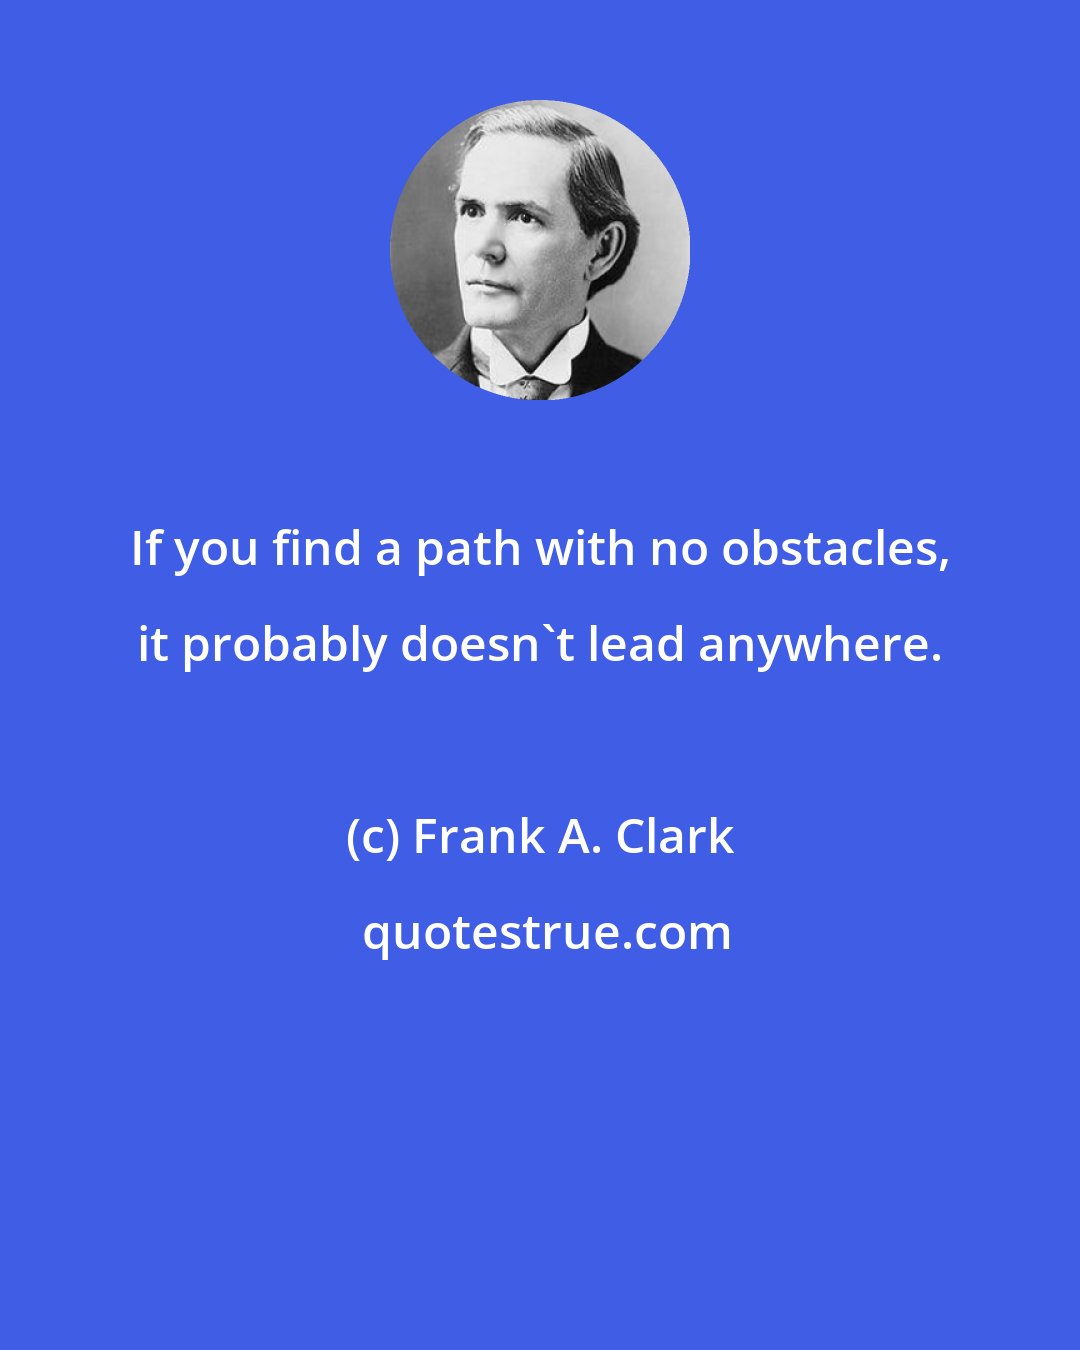 Frank A. Clark: If you find a path with no obstacles, it probably doesn't lead anywhere.